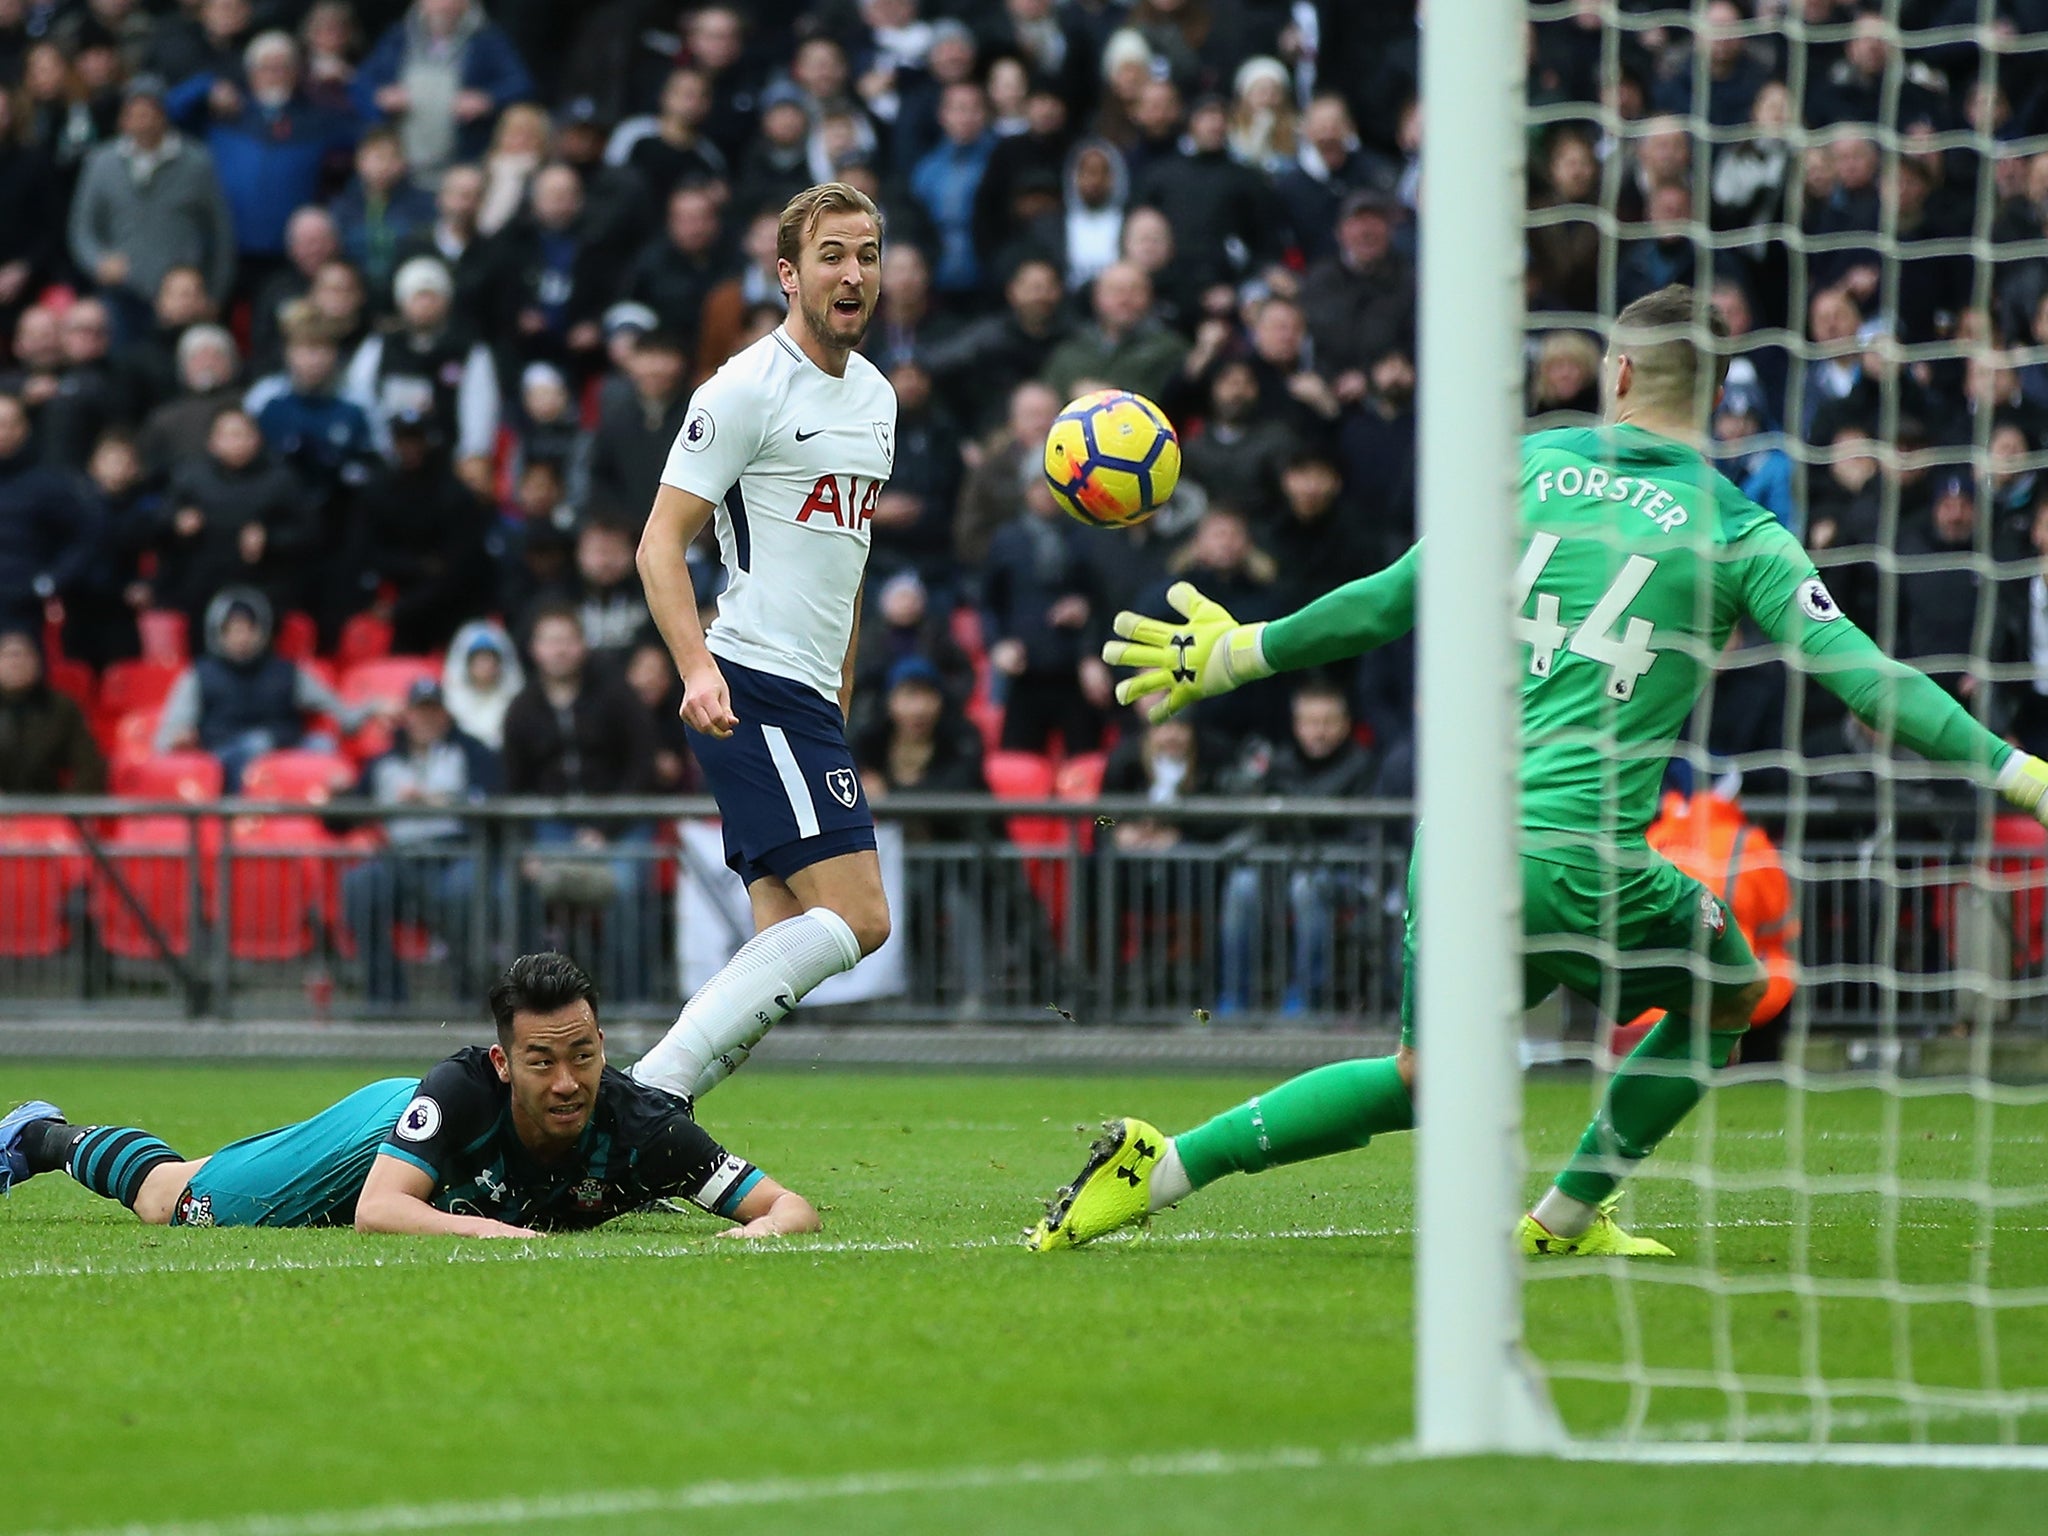 Kane chips the ball past Fraser Forster to complete his hat-trick